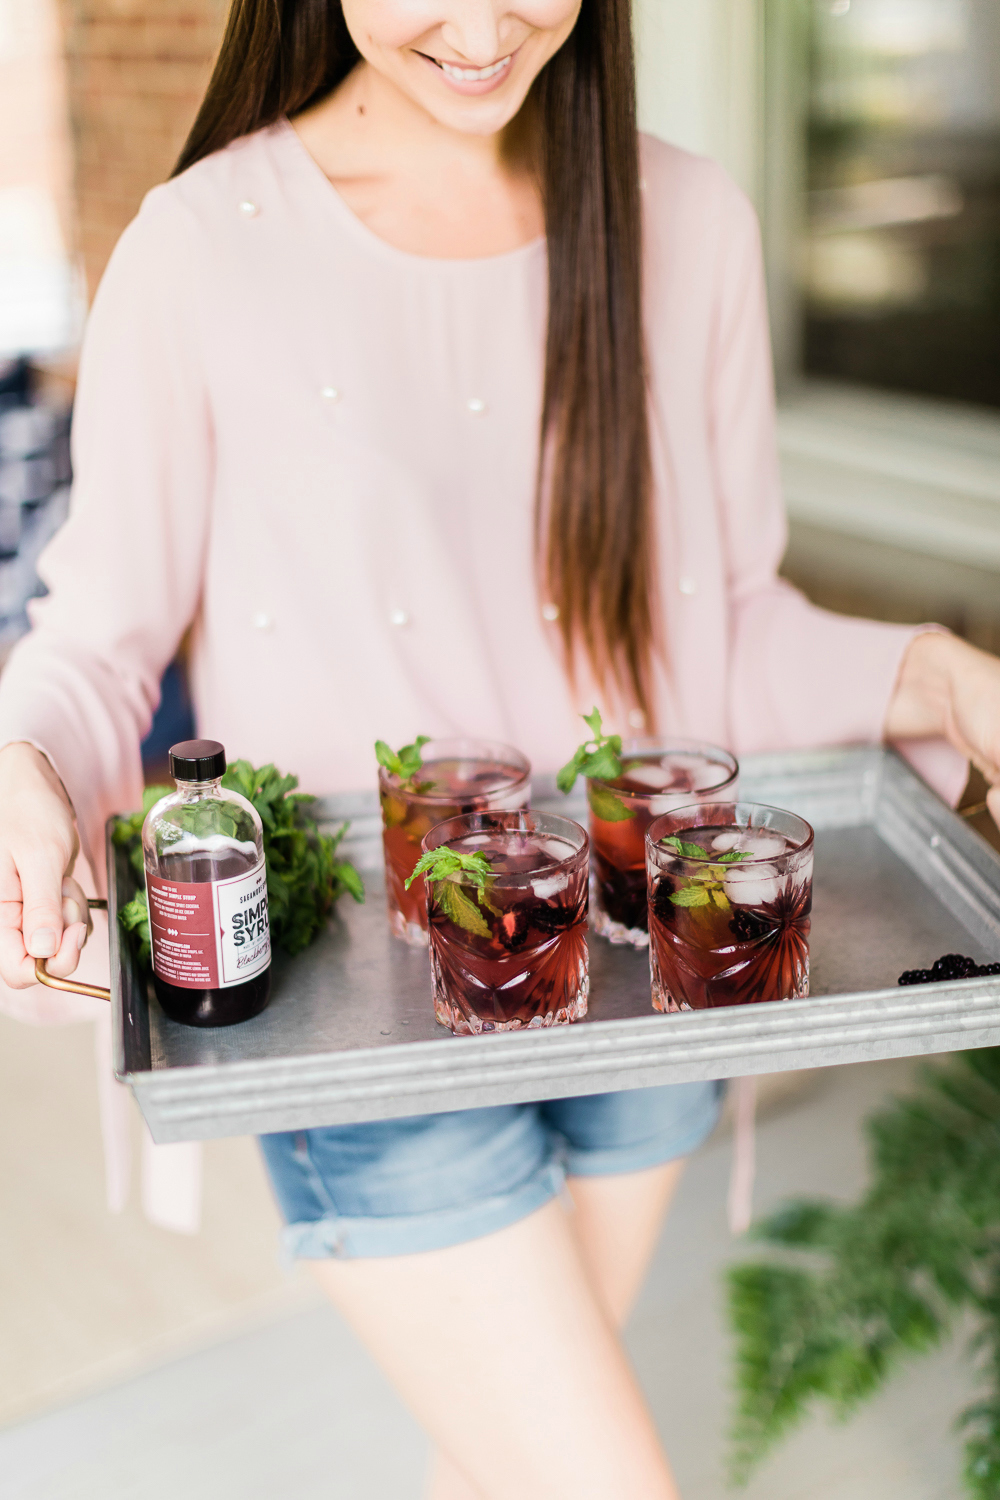 Preakness-Approved Blackberry Whiskey Cocktail: Black-Eyed Rye by southern lifestyle blogger Stephanie Ziajka from Diary of a Debutante, blackberry cocktail recipes, Sagamore Spirit Black-Eyed Rye recipe, Derby Day drink recipes, Sagamore Spirit Blackberry Simple Syrup